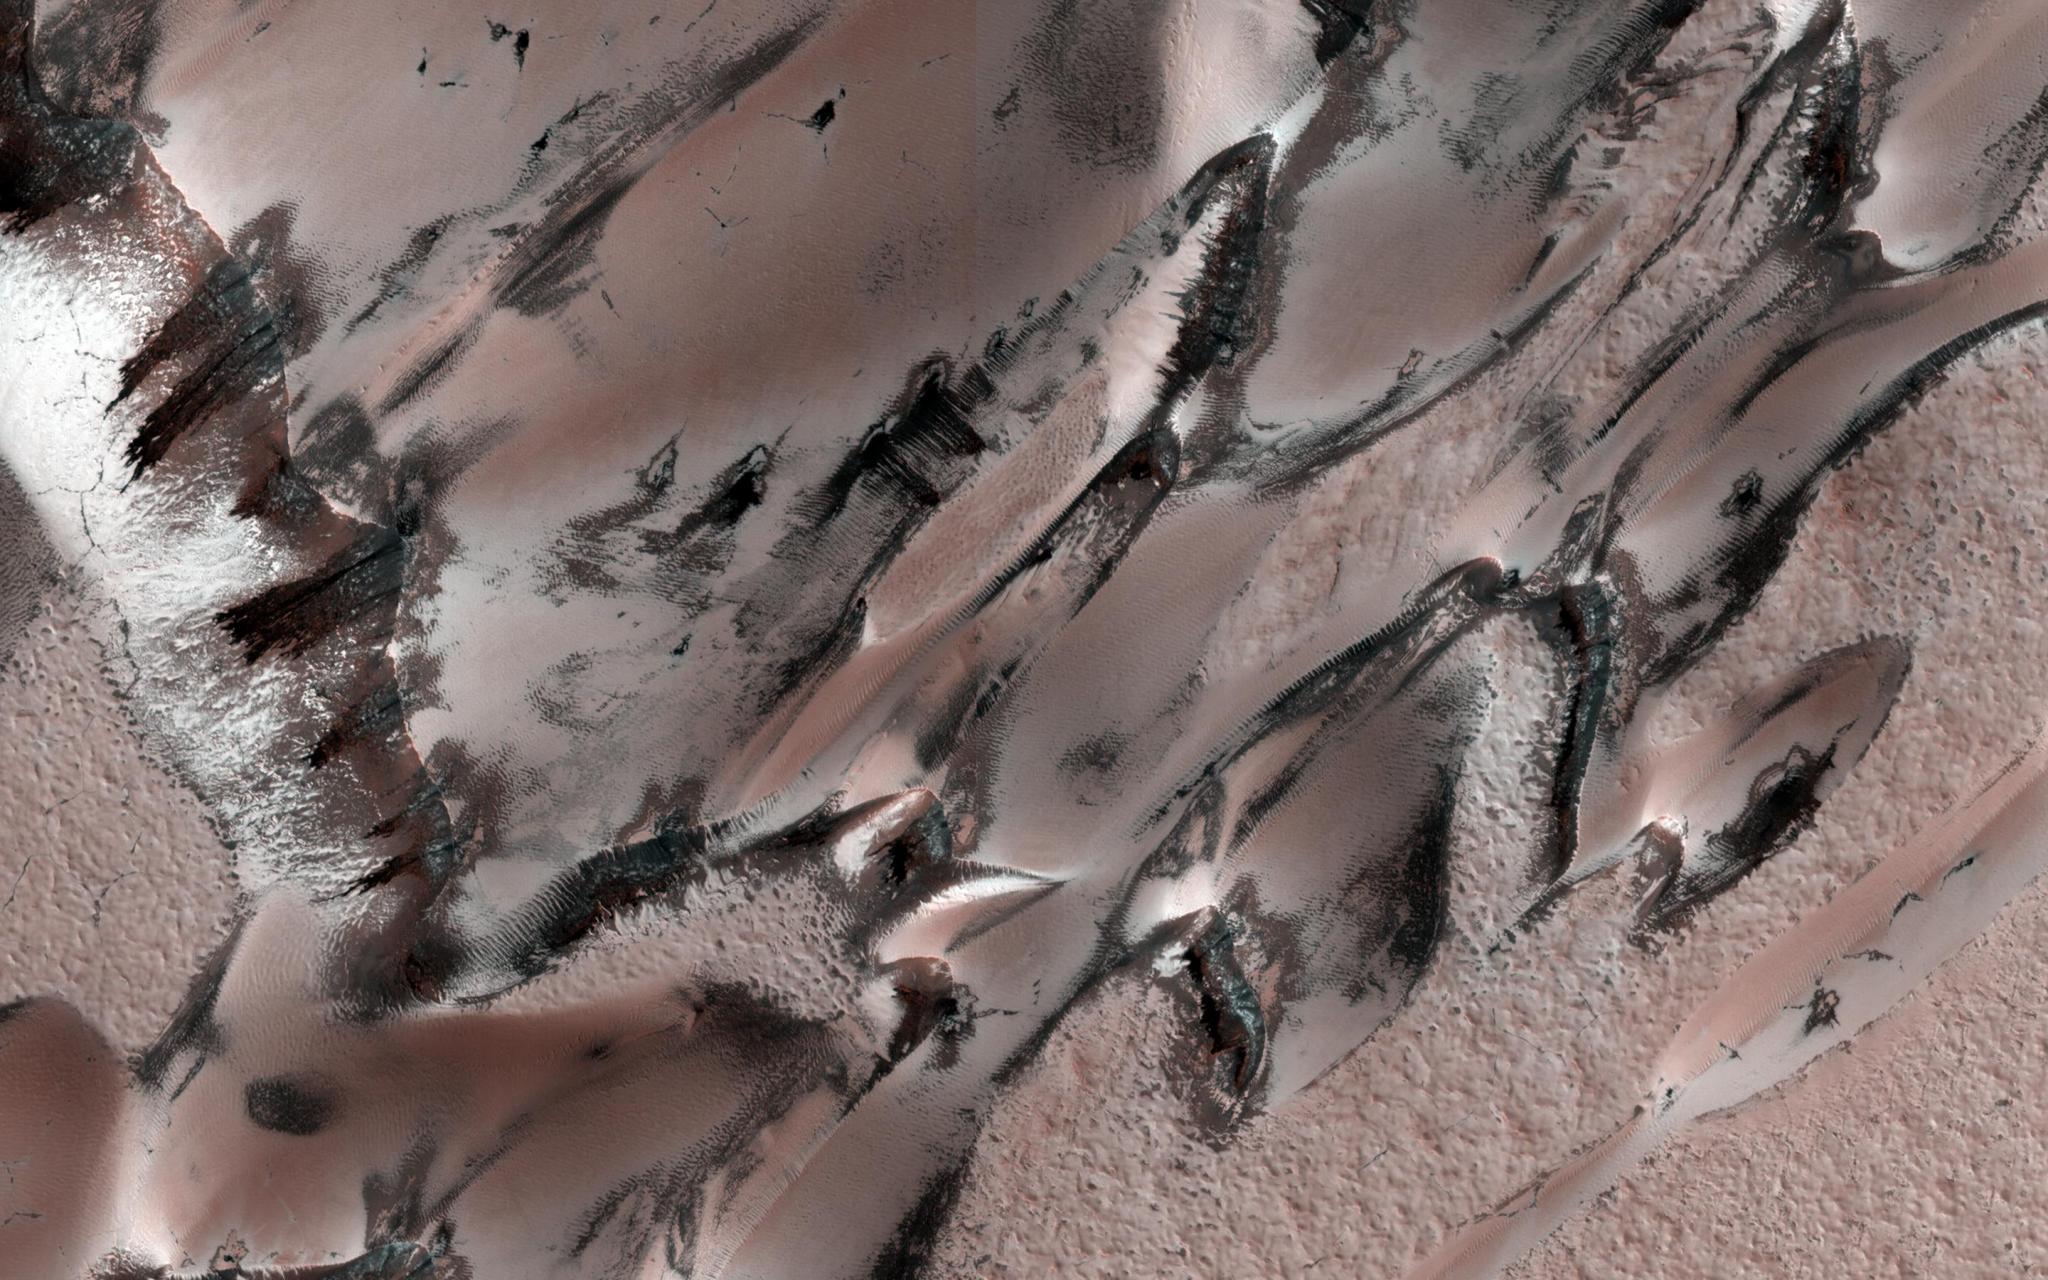 HiRISE captured these “megadunes,” also called barchans. Carbon dioxide frost and ice have formed over the dunes during the winter; as this starts to sublimate during spring, the darker-colored dune sand is revealed.